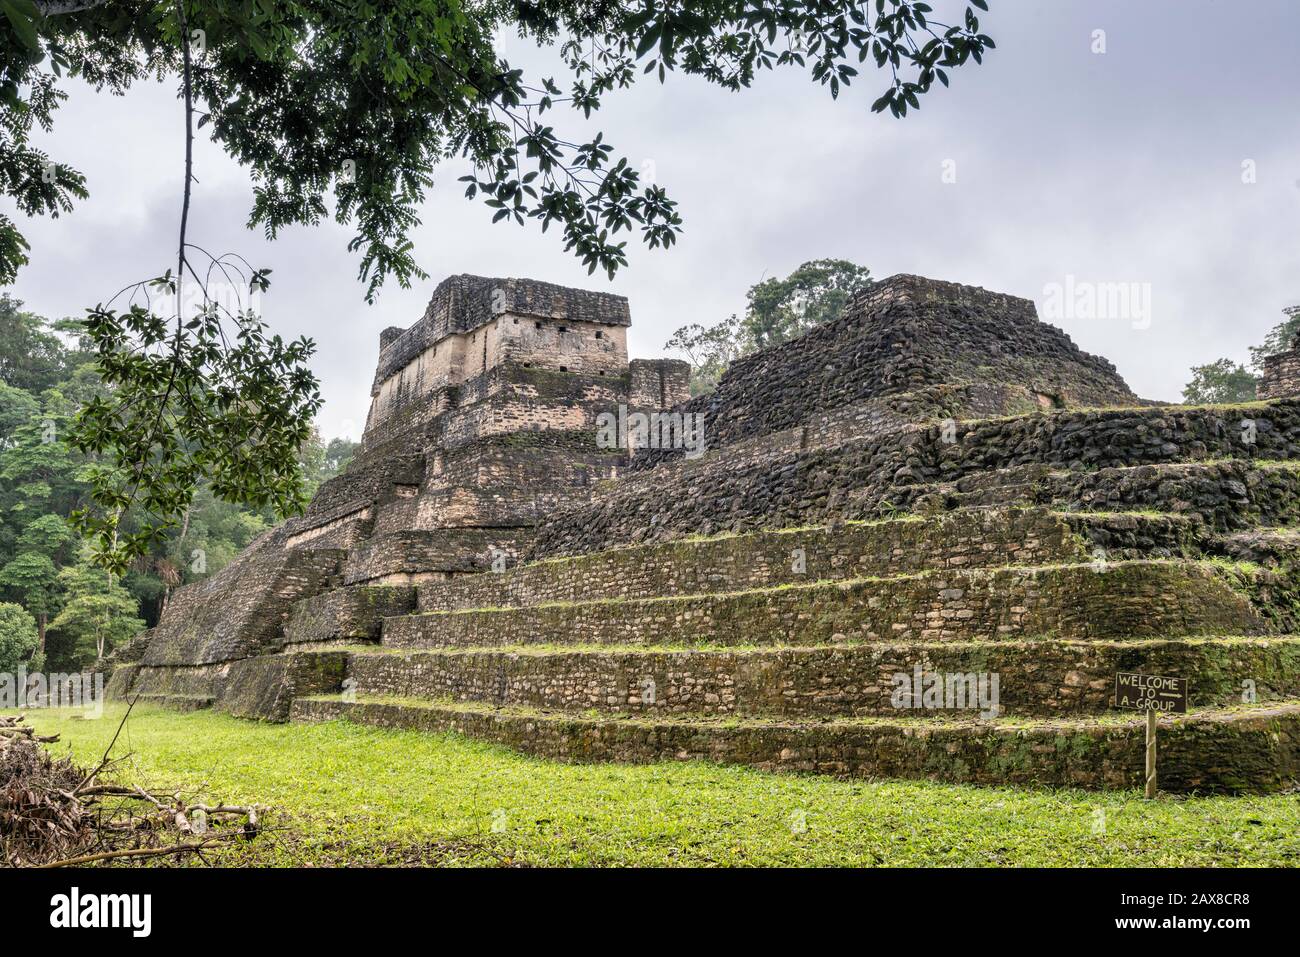 Structure A-2 pyramid at Plaza A, rainforest, at Caracol, Mayan ruins, Chiquibul Plateau, Cayo District, Belize, Central America Stock Photo